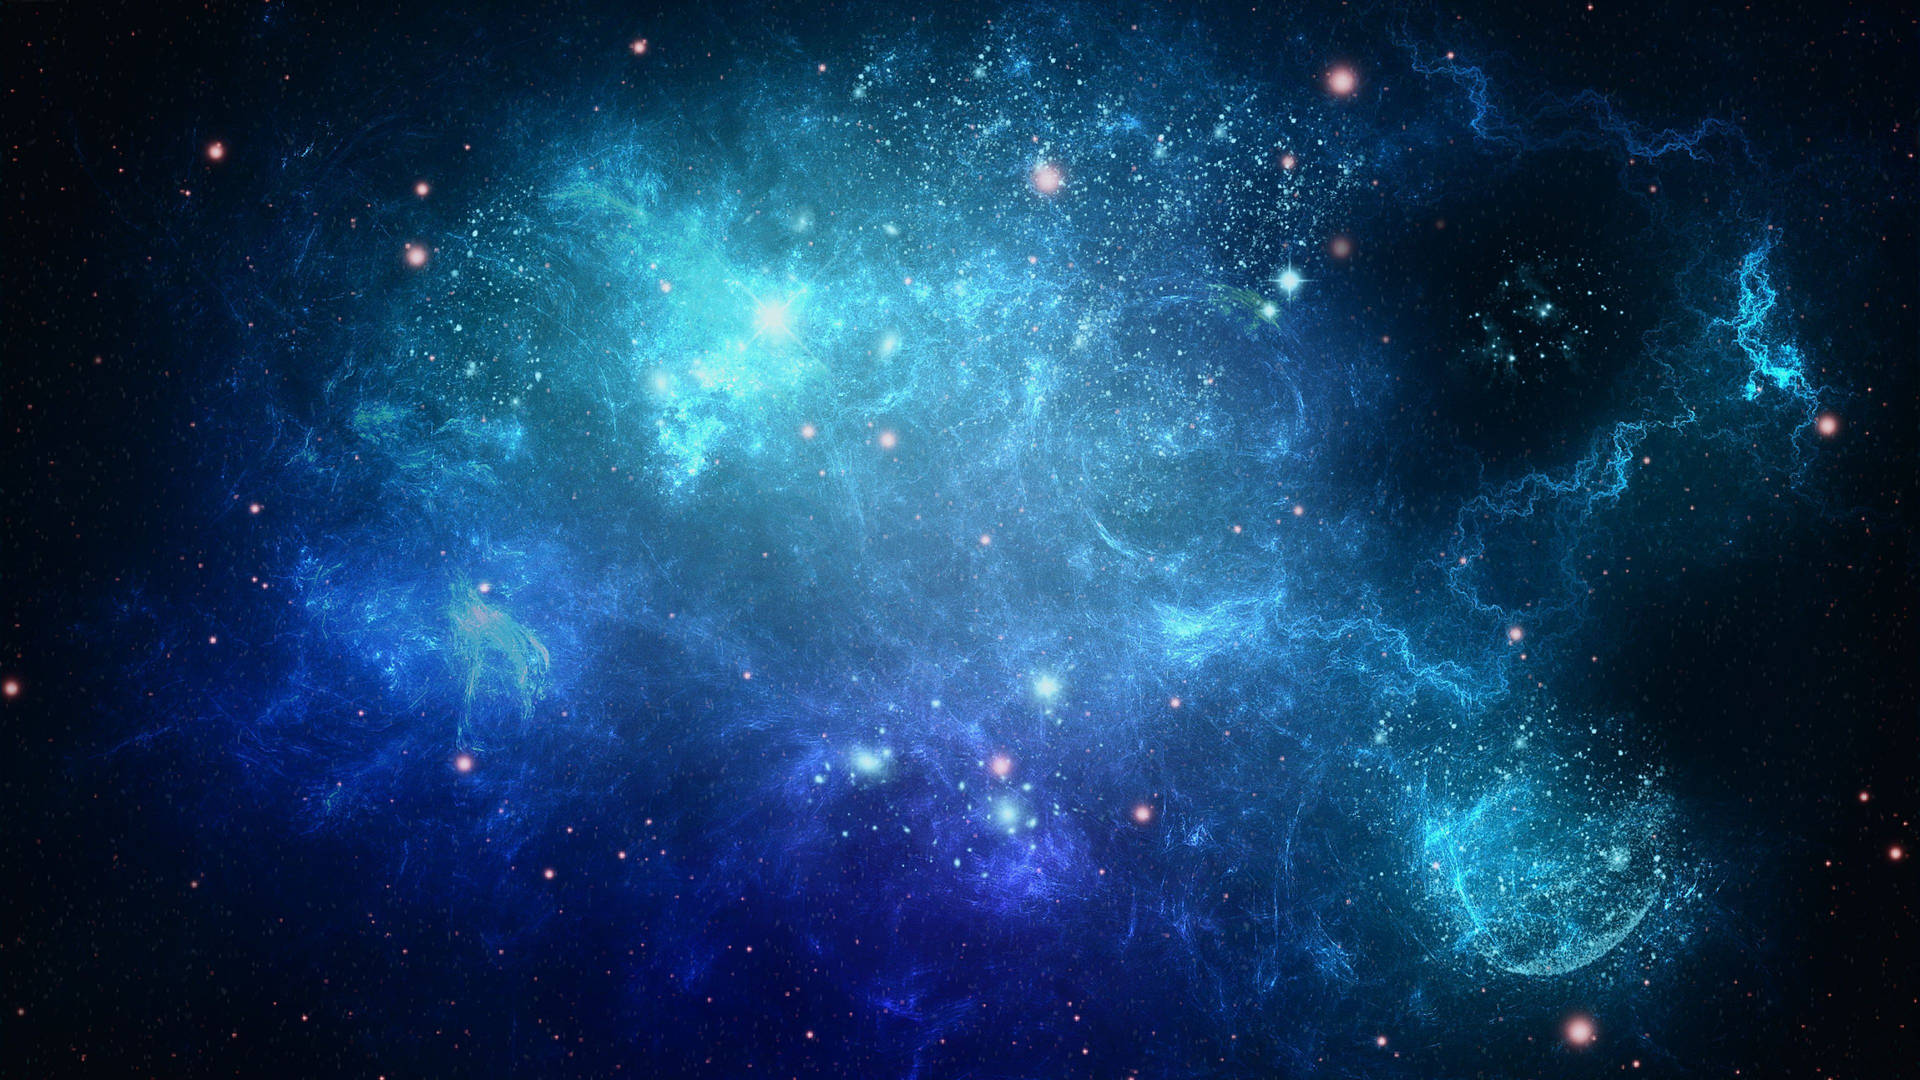 100+] Blue Galaxy Wallpapers for FREE 